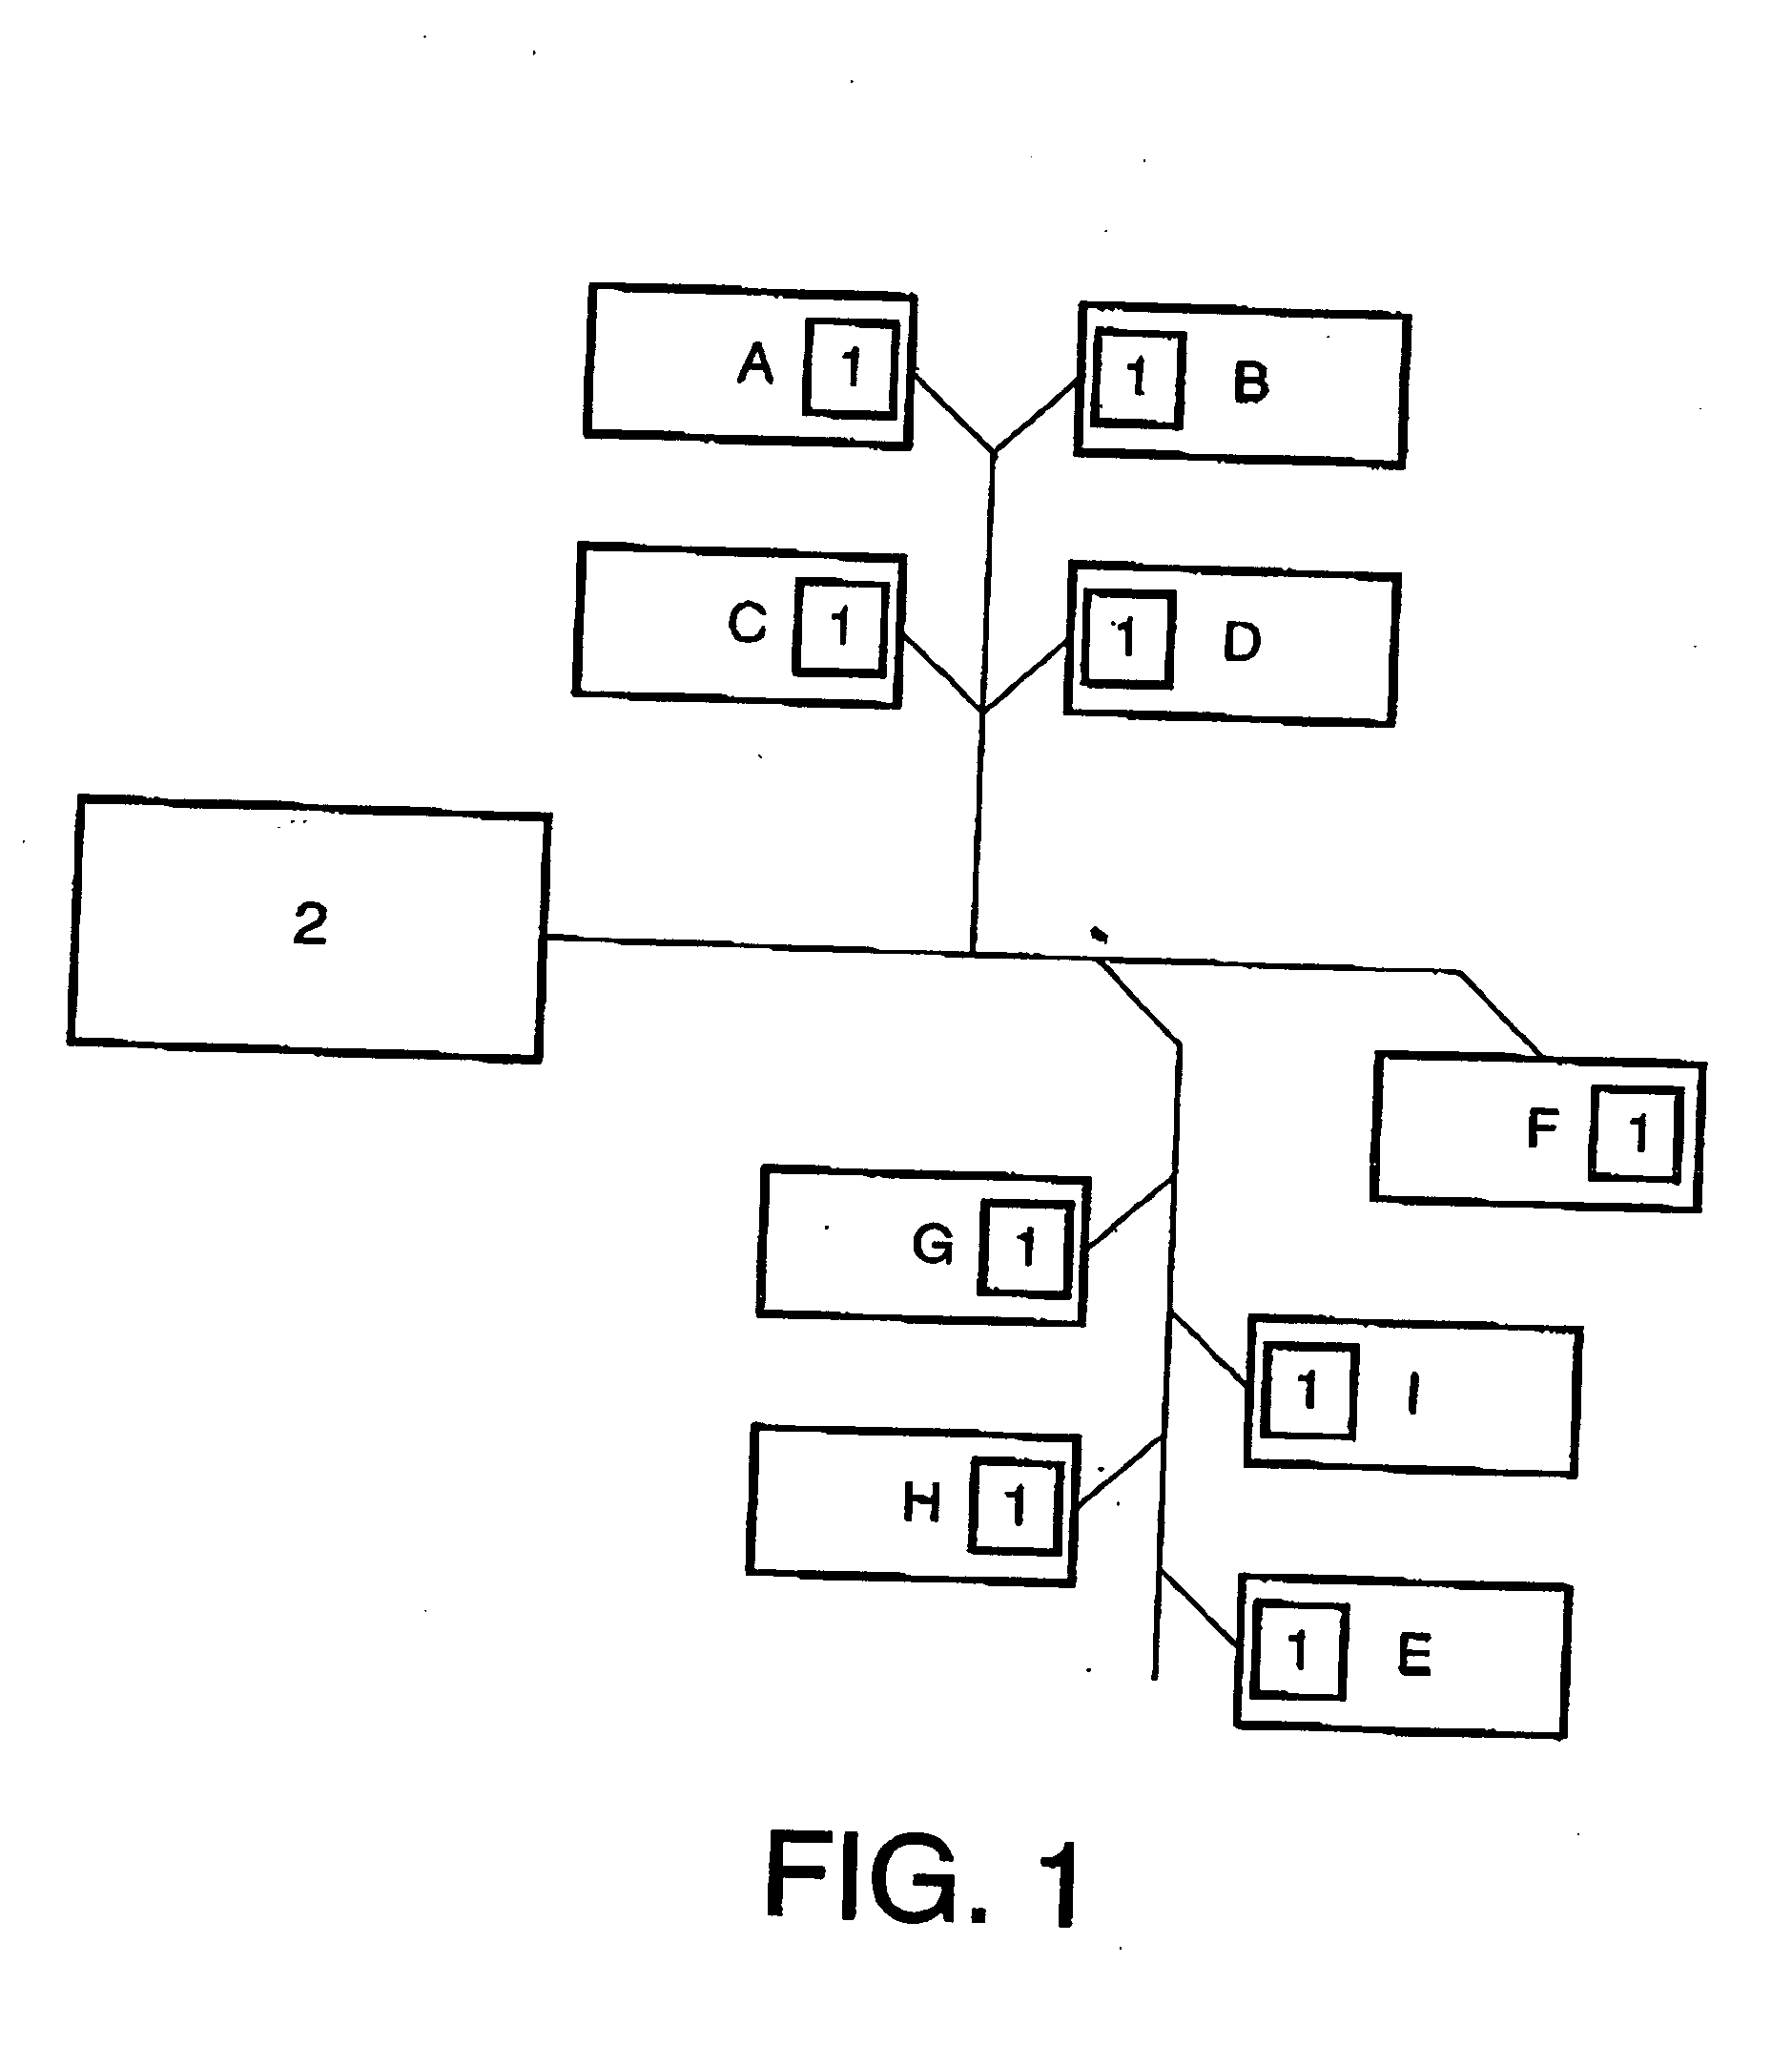 Method enabling multiple communication nodes to access a transmission means on an electrical grid